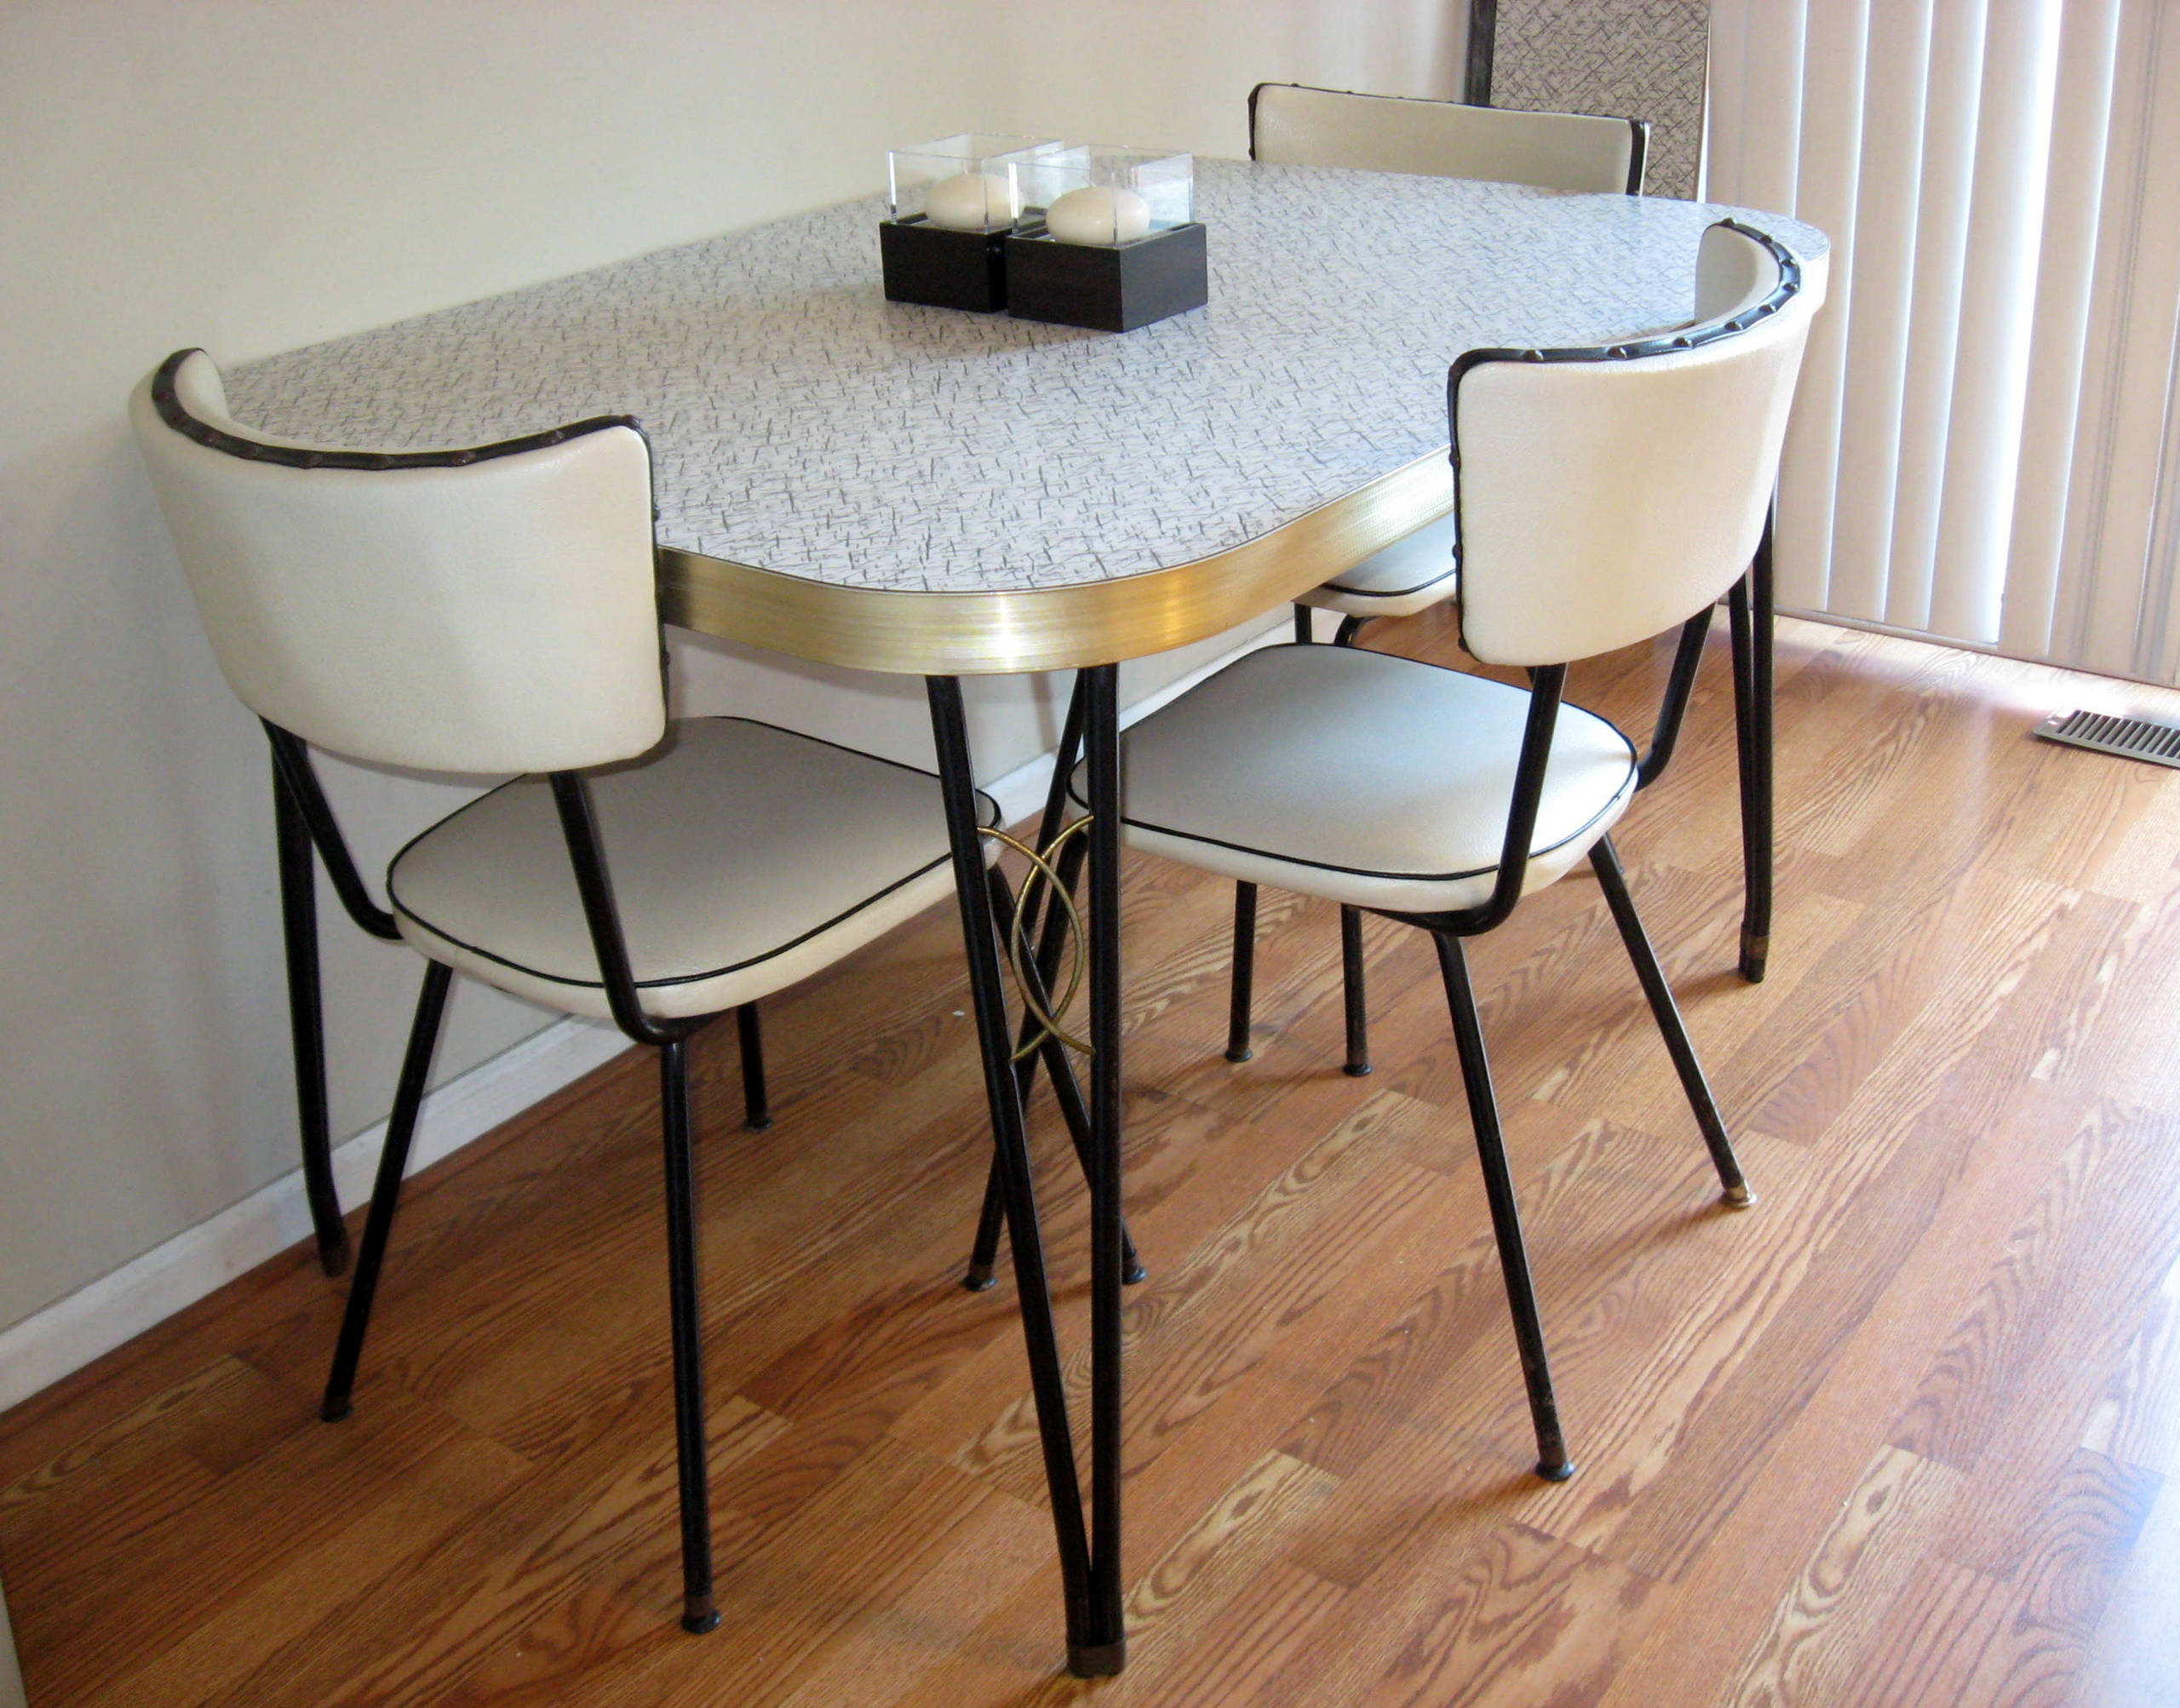 Retro Kitchen Table And Chairs Visualhunt, Vintage Metal Dining Table And Chairs